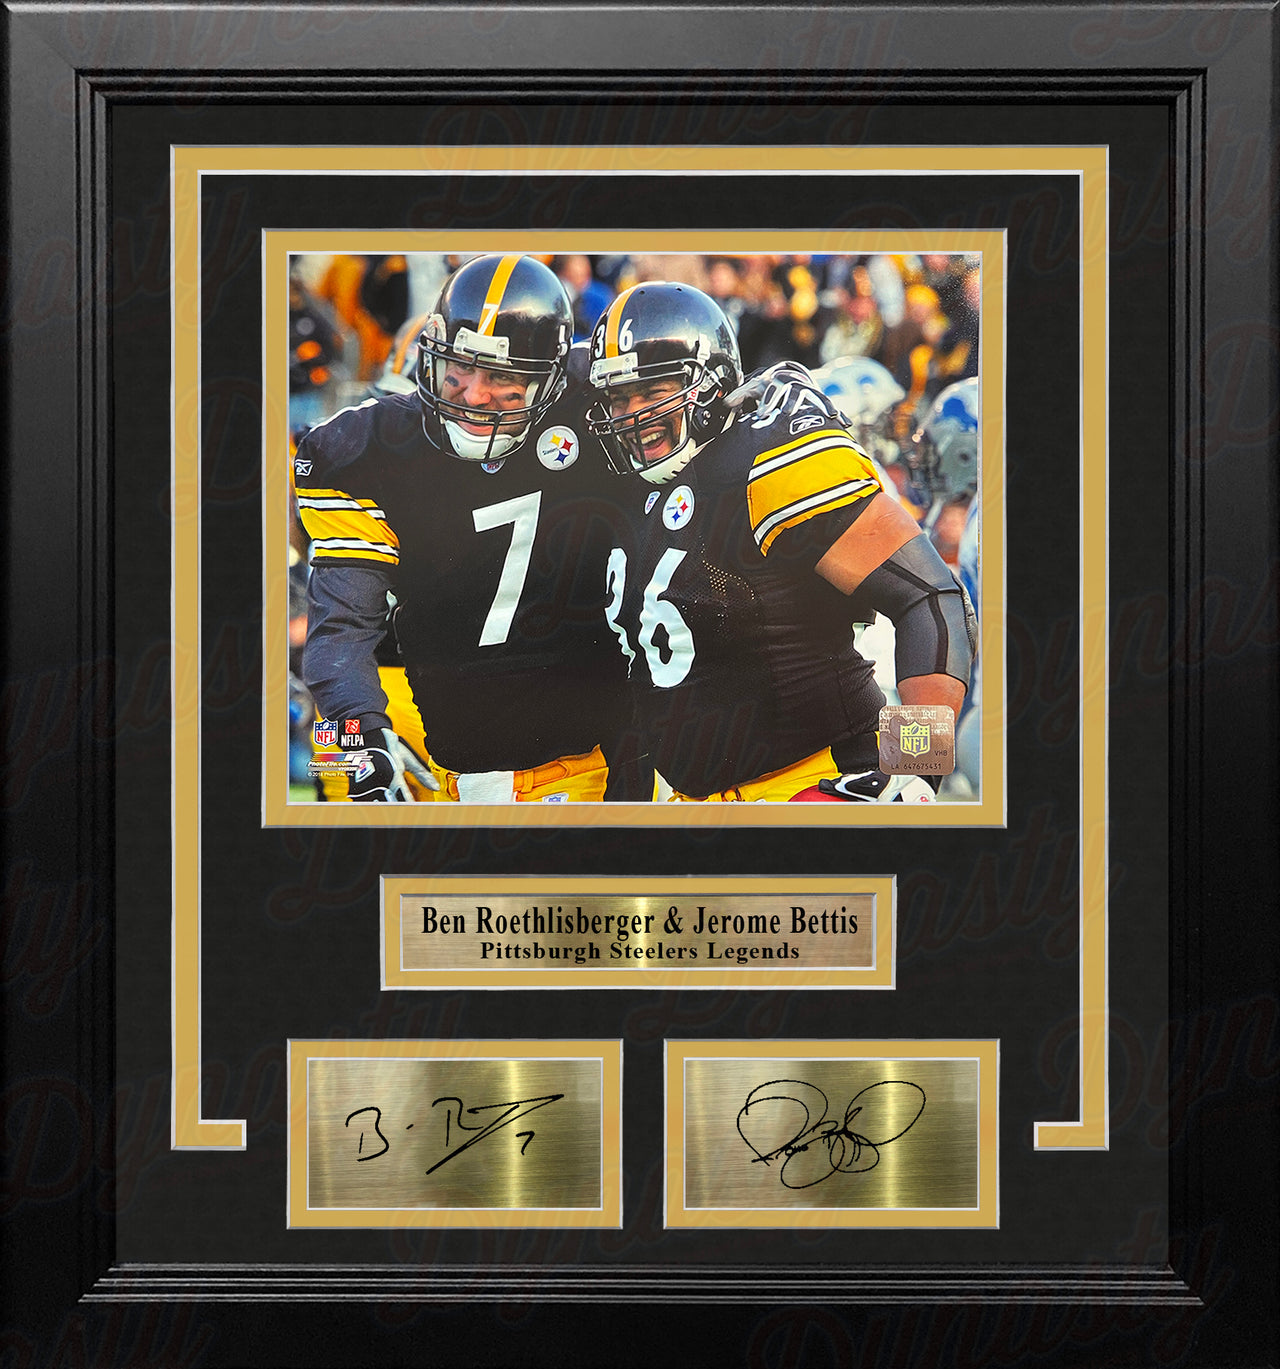 Ben Roethlisberger & Jerome Bettis Pittsburgh Steelers 8x10 Framed Photo with Engraved Autographs